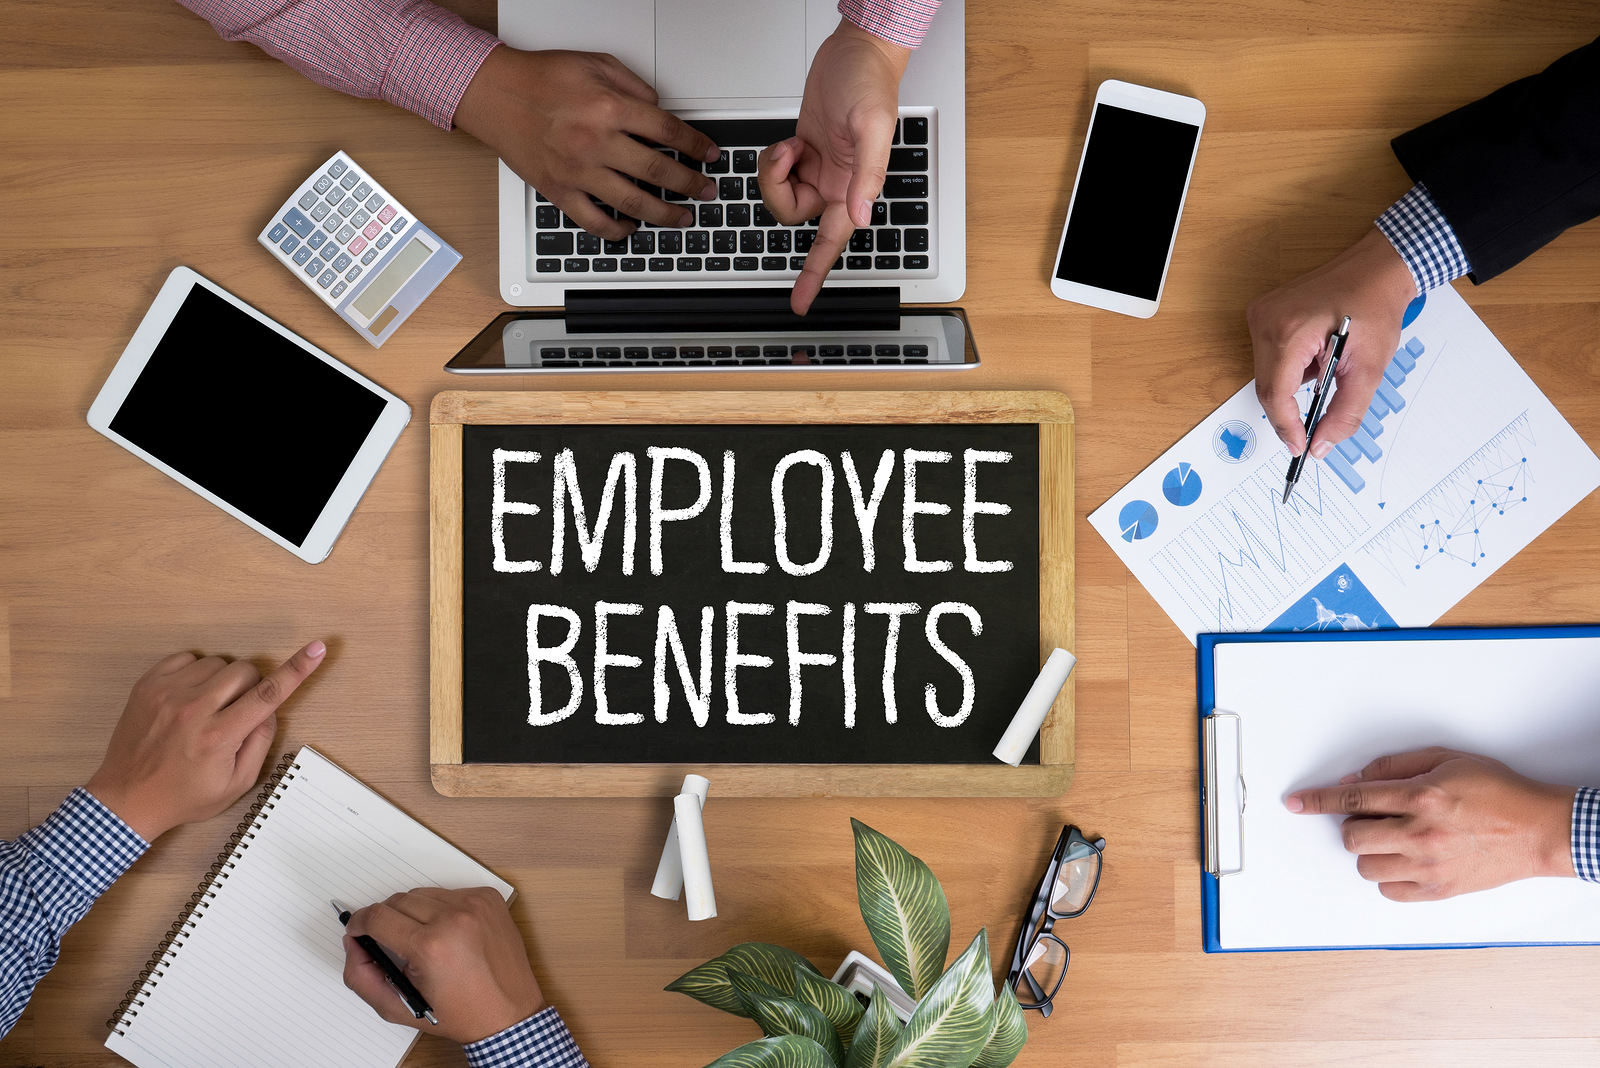 The Benefit in Kind Employees Value Most - Pandle